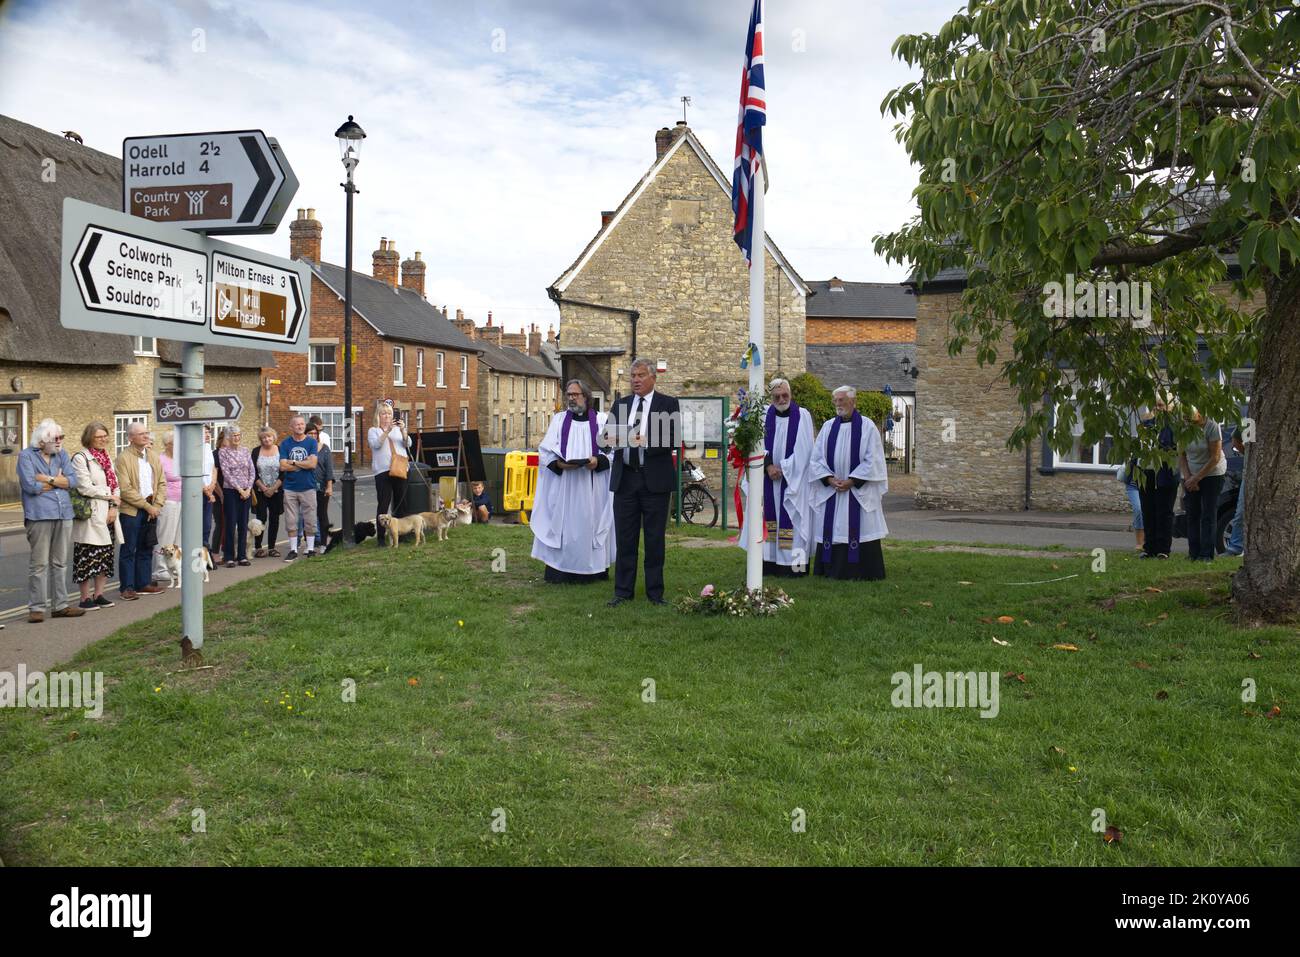 Proclamation of the accession of King Charles III by parish councillor on the green in the Bedfordshire village of Sharnbrook Stock Photo